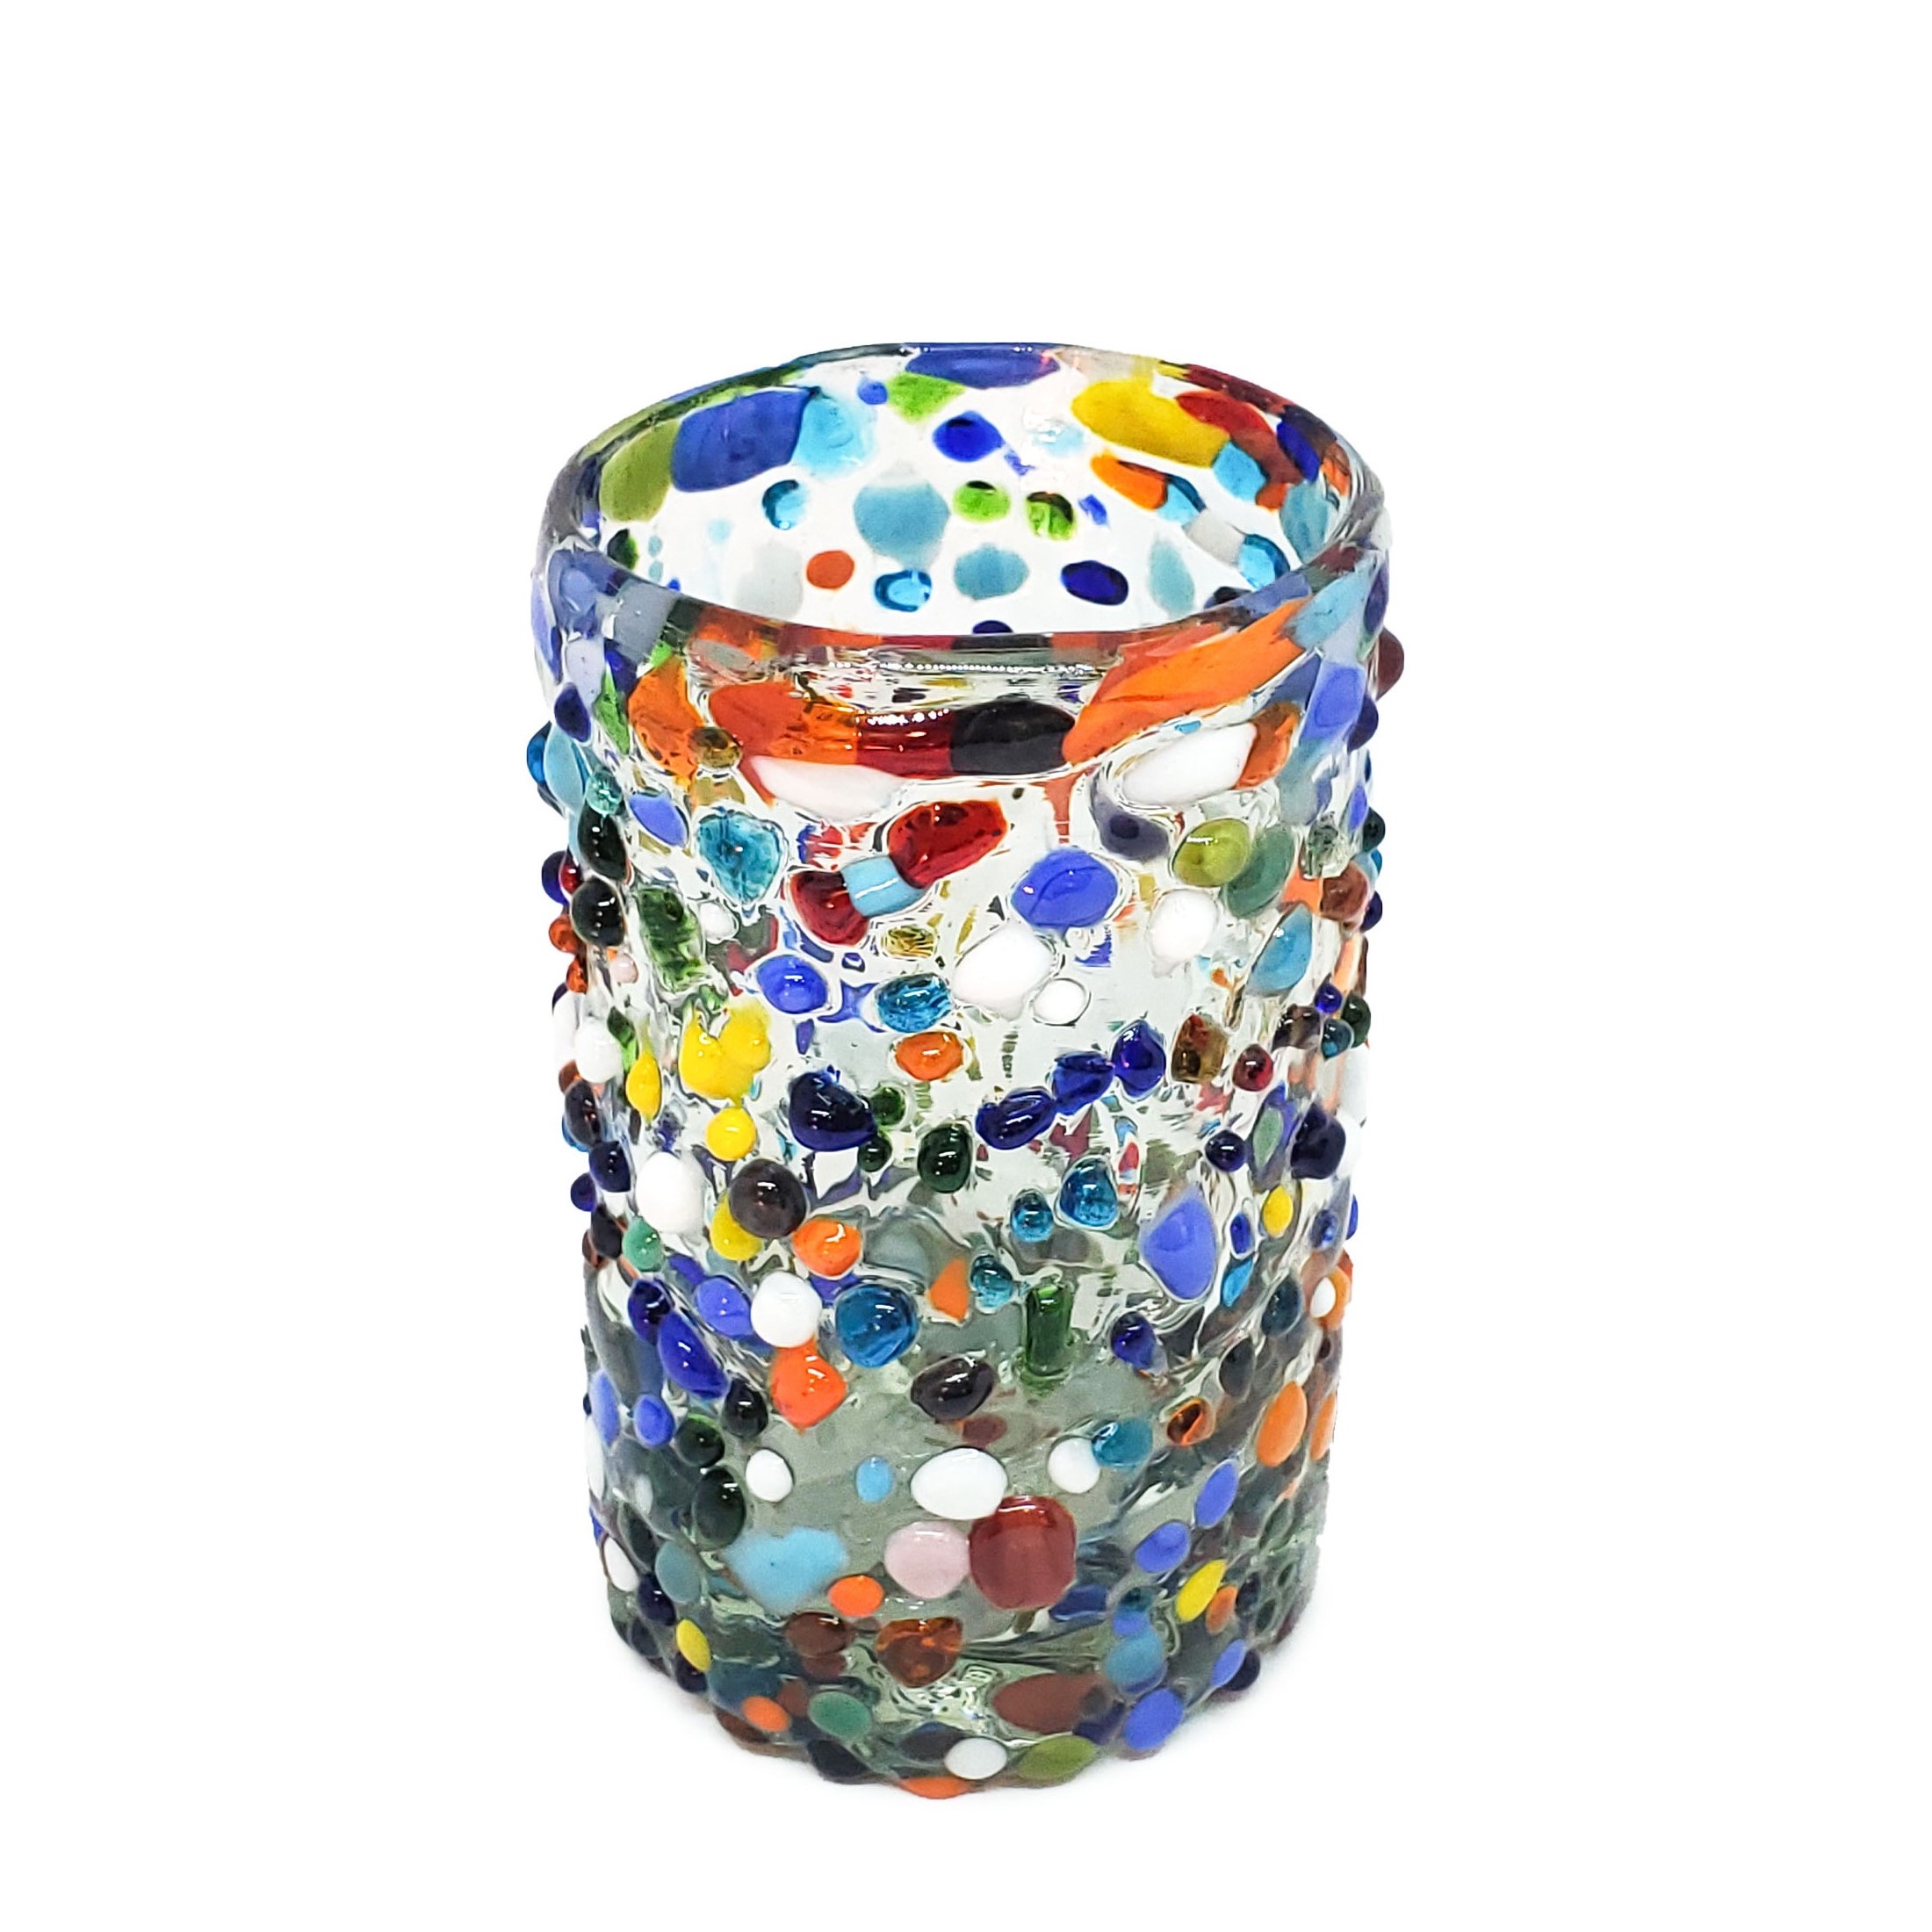 Mexican Glasses / Confetti Rocks 9 oz Juice Glasses (set of 6) / Let the spring come into your home with this colorful set of glasses. The multicolor glass rocks decoration makes them a standout in any place.